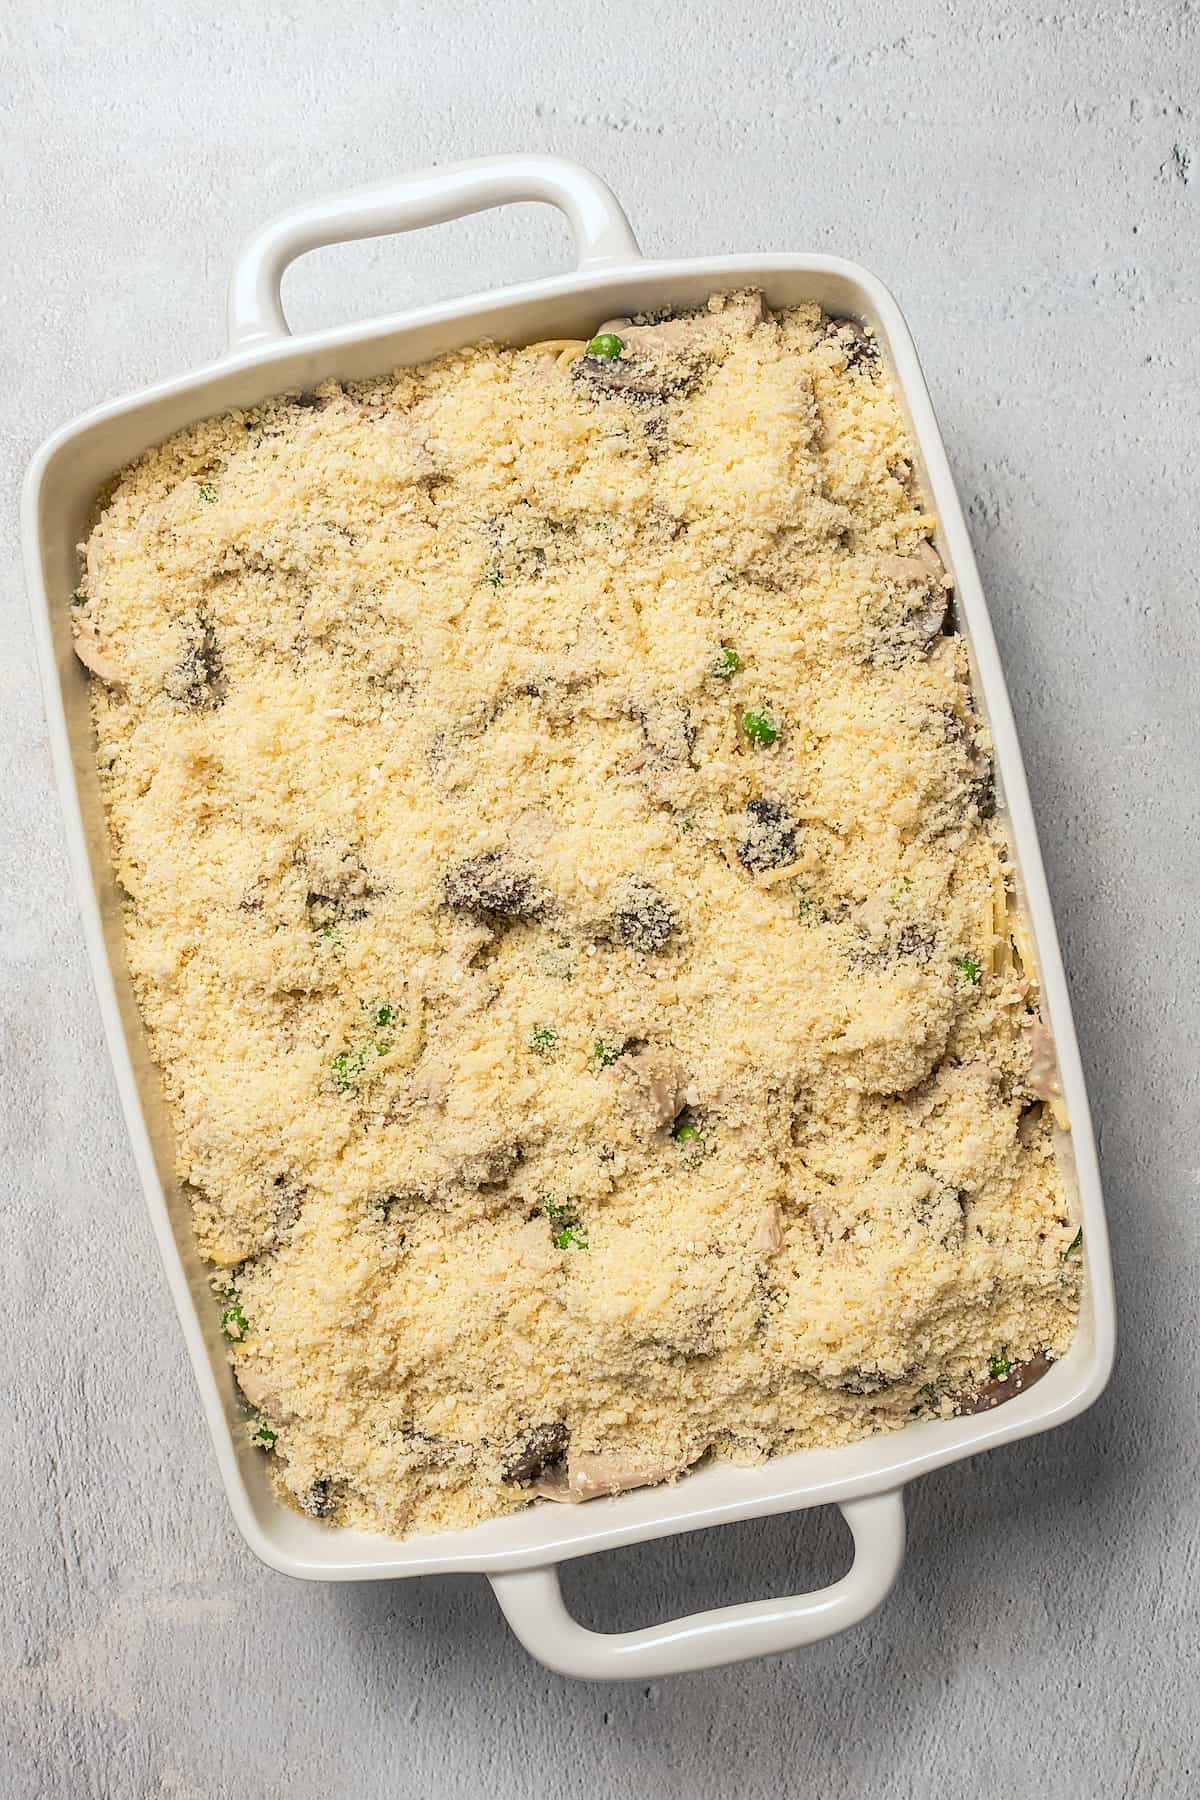 A rectangular dish of unbaked pasta topped with cheese.